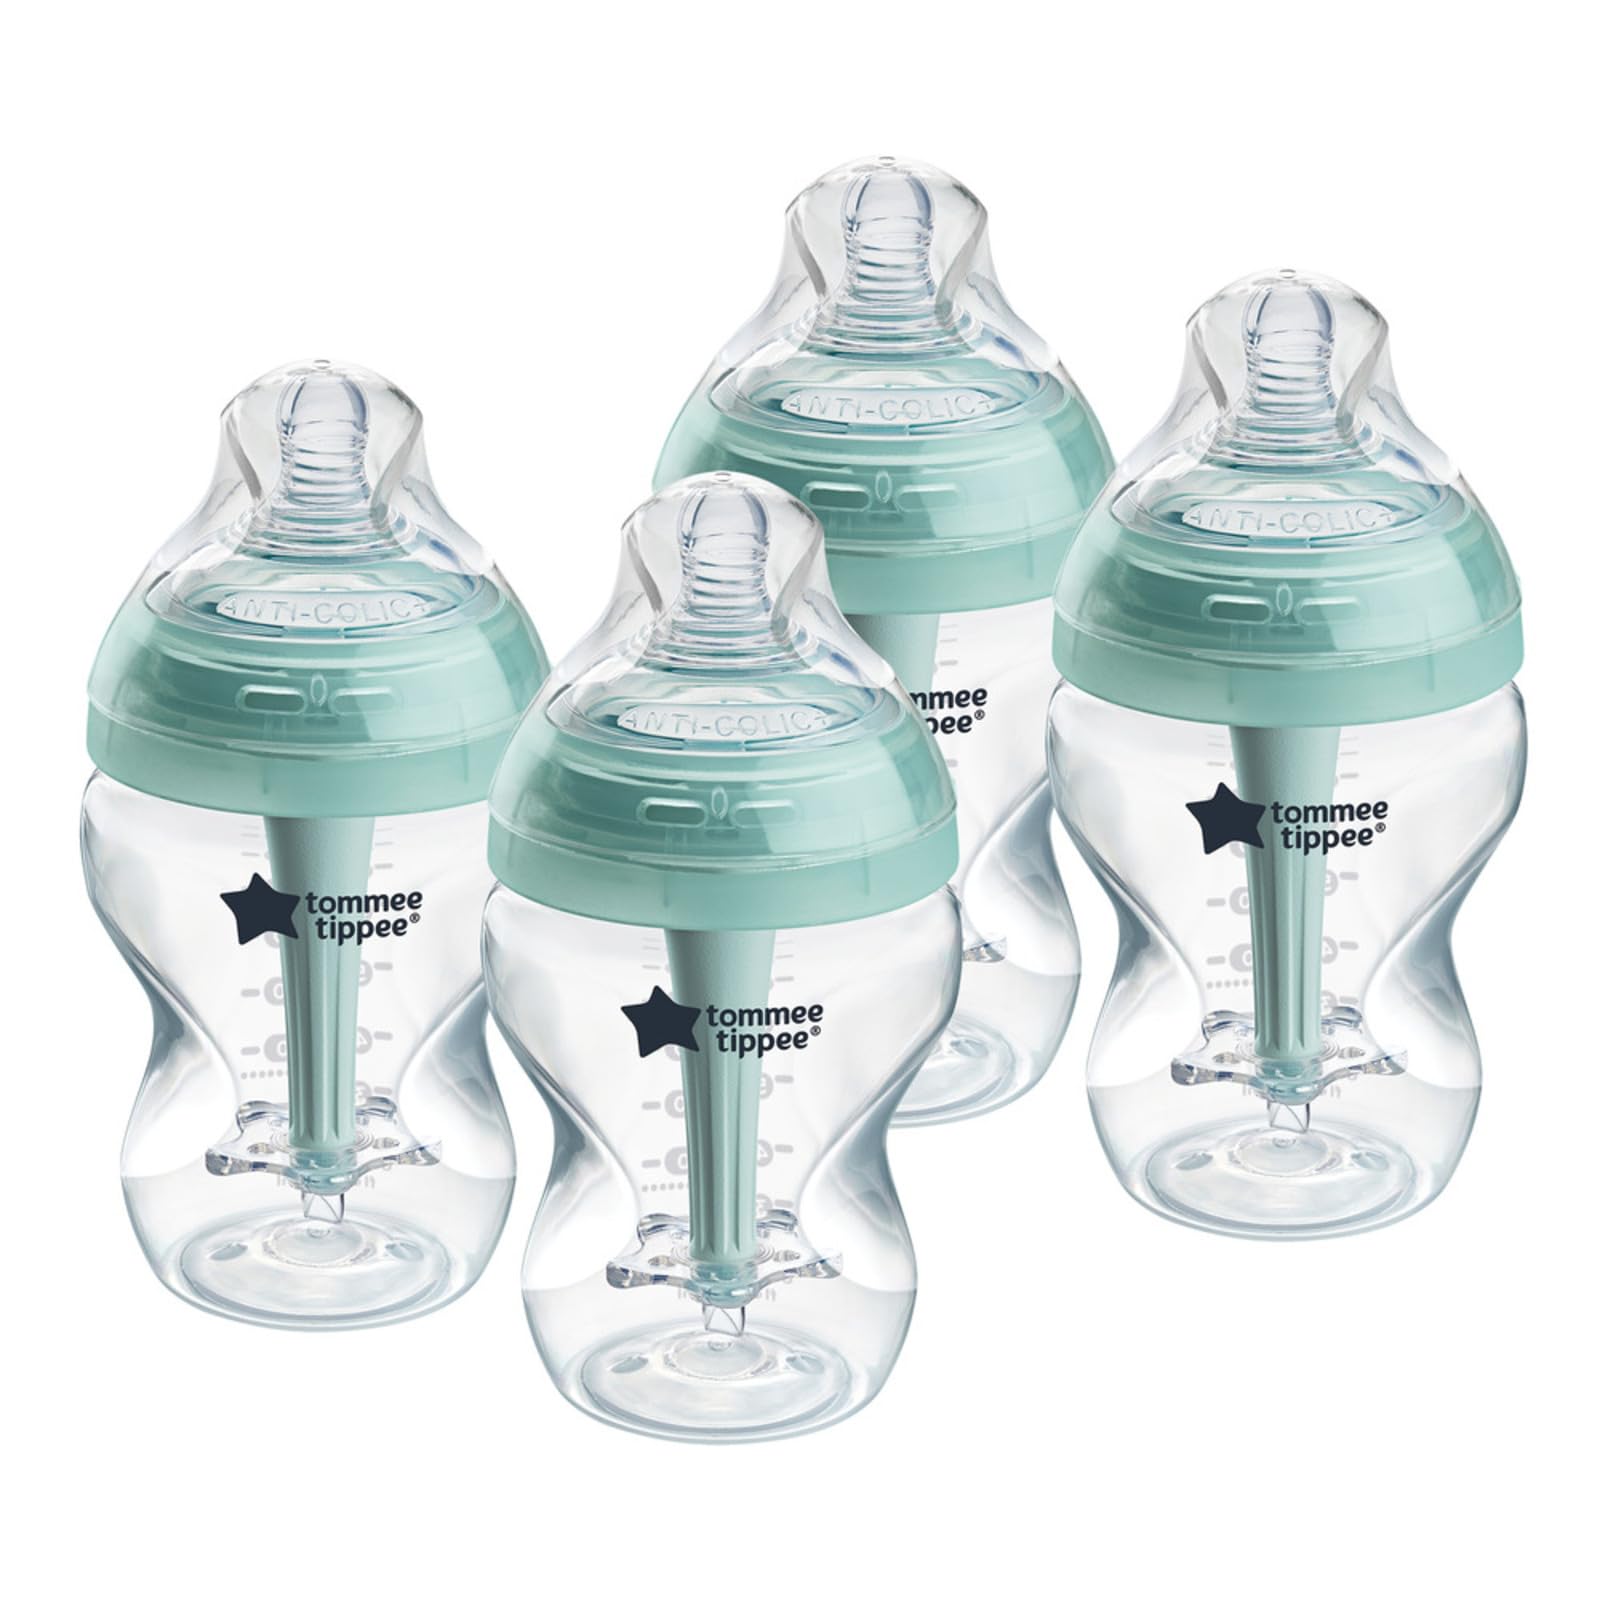 Tommee Tippee Baby Bottles, Advanced Anti-Colic Baby Bottle with Slow Flow Breast-Like Nipple, 9oz, 0m+, Baby Feeding Essentials, Pack of 4